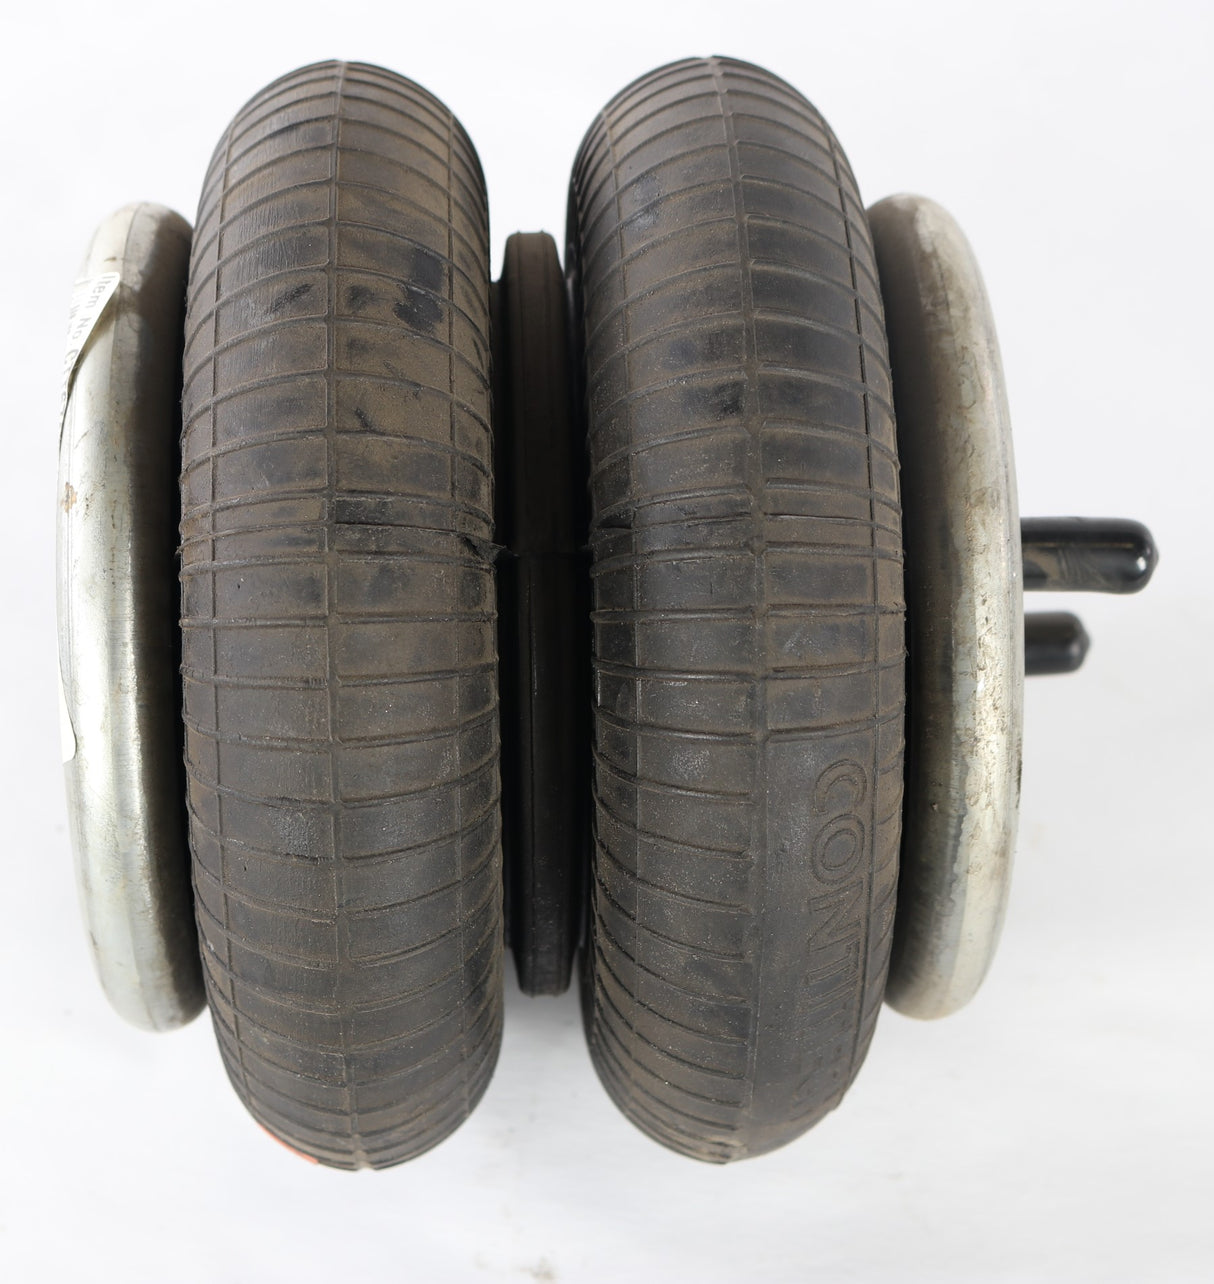 CONTINENTAL AG - CONTITECH/ELITE/GOODYEAR/ROULUNDS ­-­ FD 110-15 746 ­-­ AIR SPRING